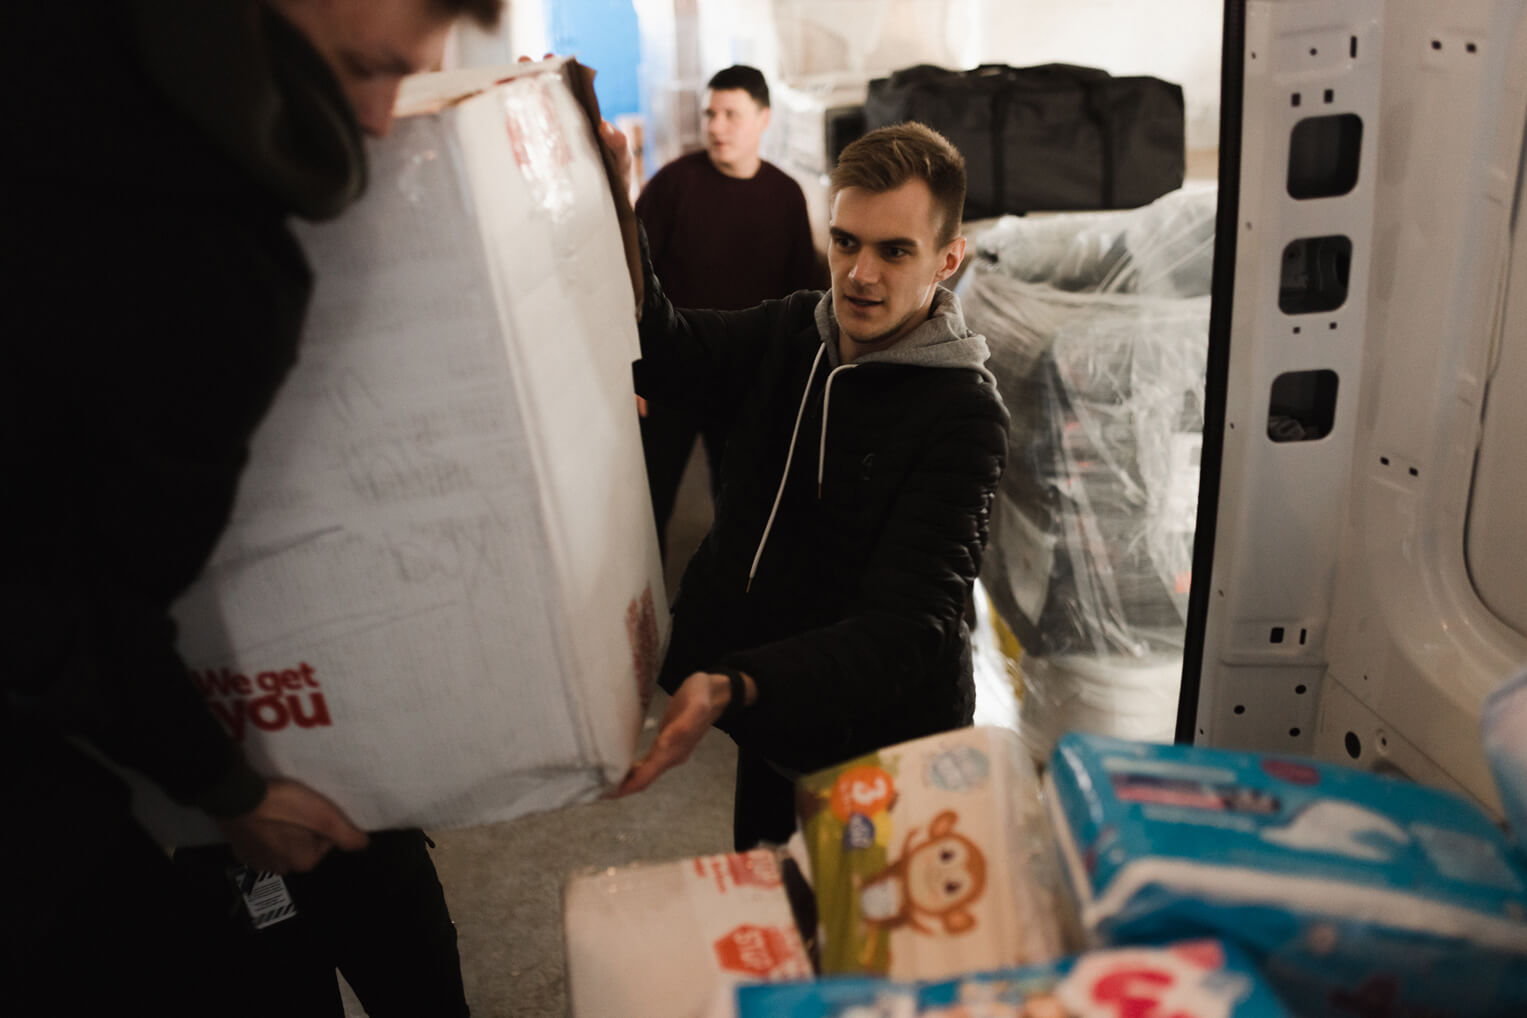 Samaritan's Purse staff, in partnership with the local church, are procuring and transporting large quantities of food and other essential items for families displaced by conflict in Ukraine.